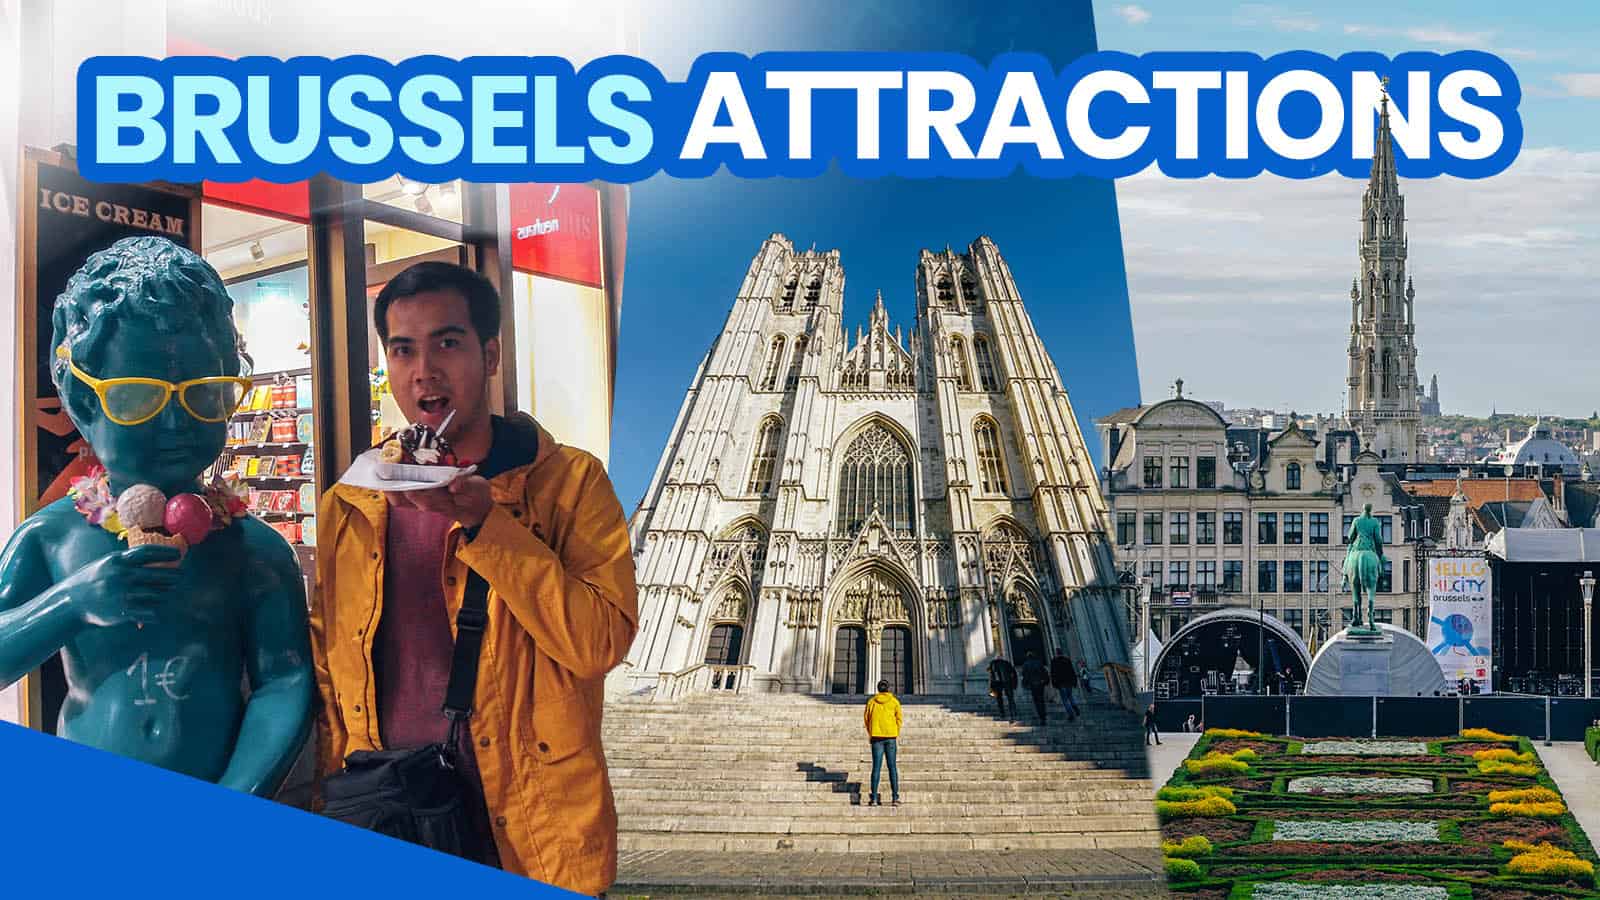 BRUSSELS: 20 Best Things to Do & Places to Visit